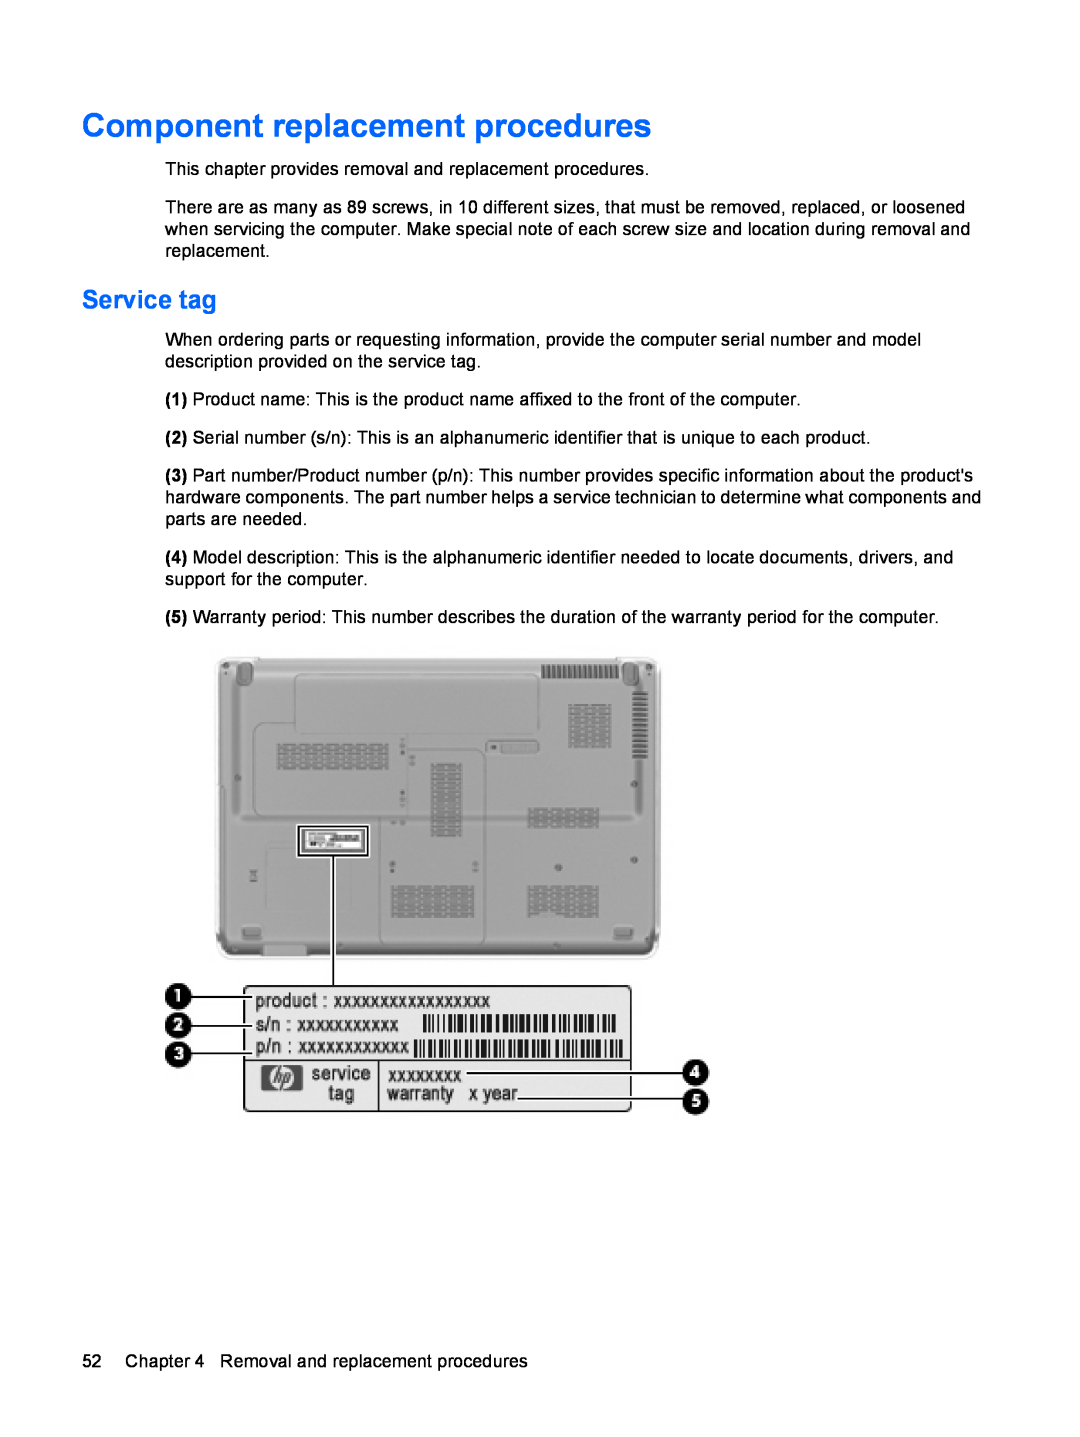 HP DV6 manual Component replacement procedures, Service tag 